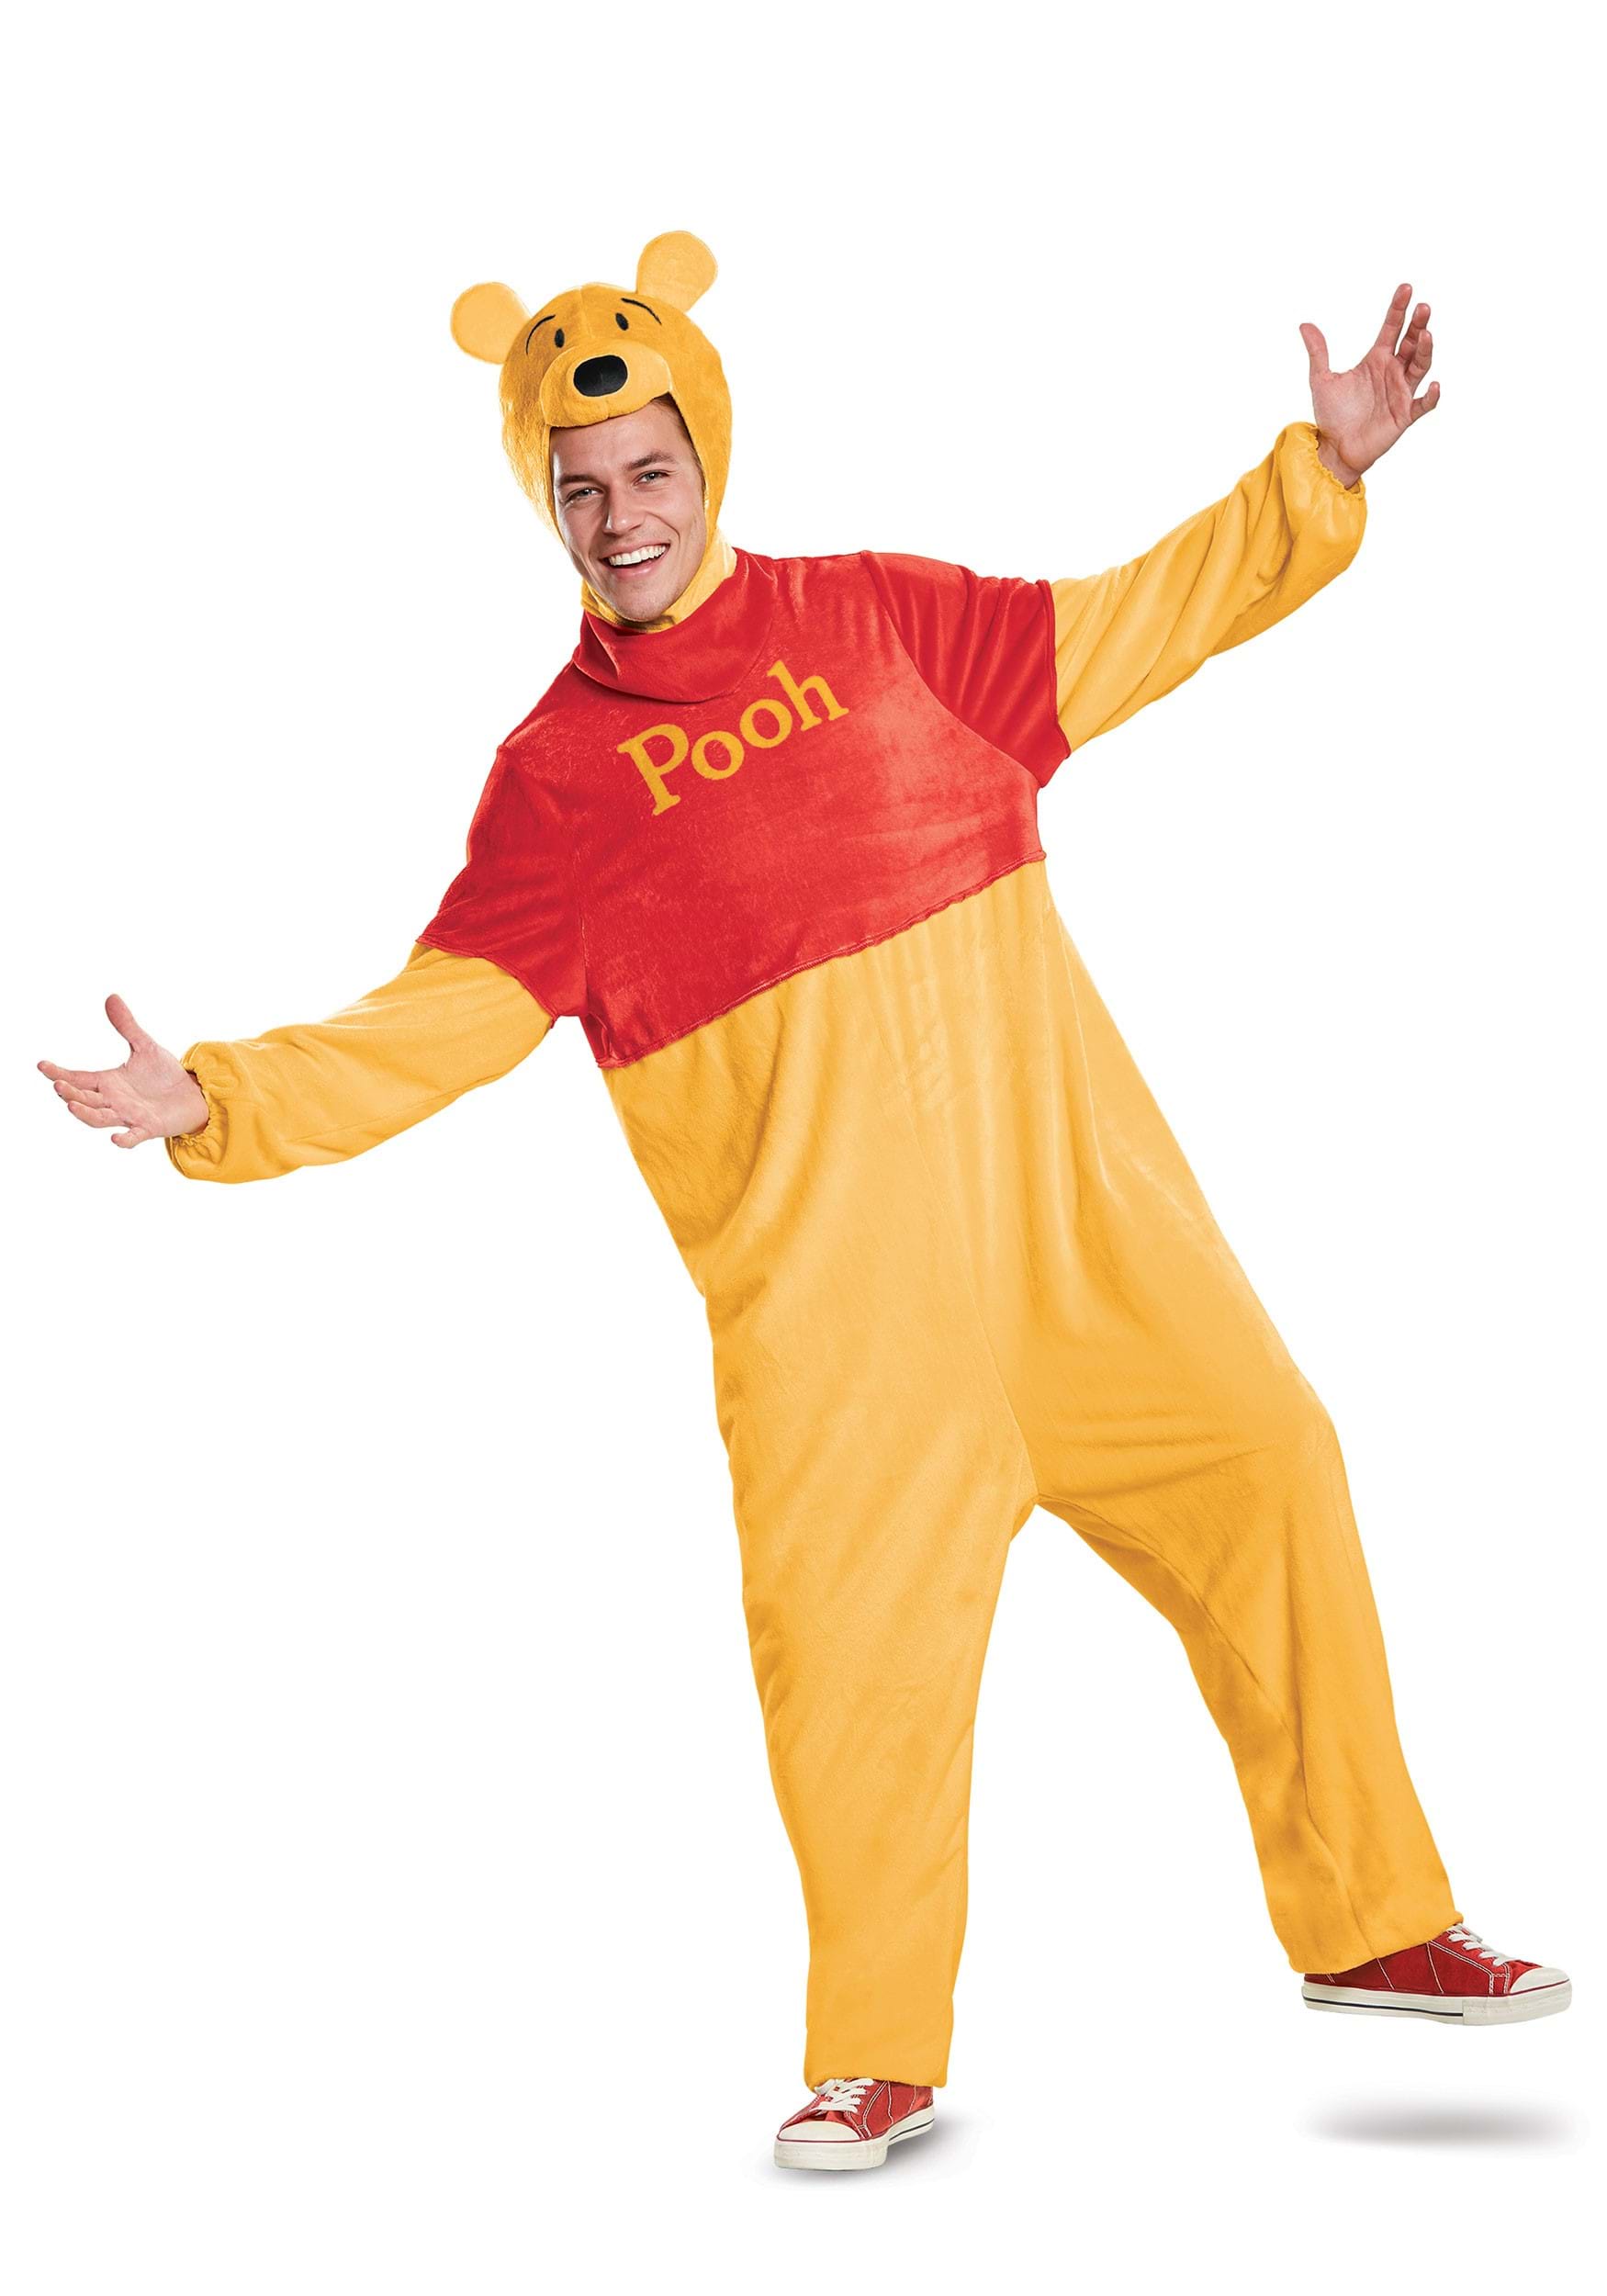 Photos - Fancy Dress Deluxe Disguise Limited  Winnie the Pooh Costume for Adults Orange/Red 